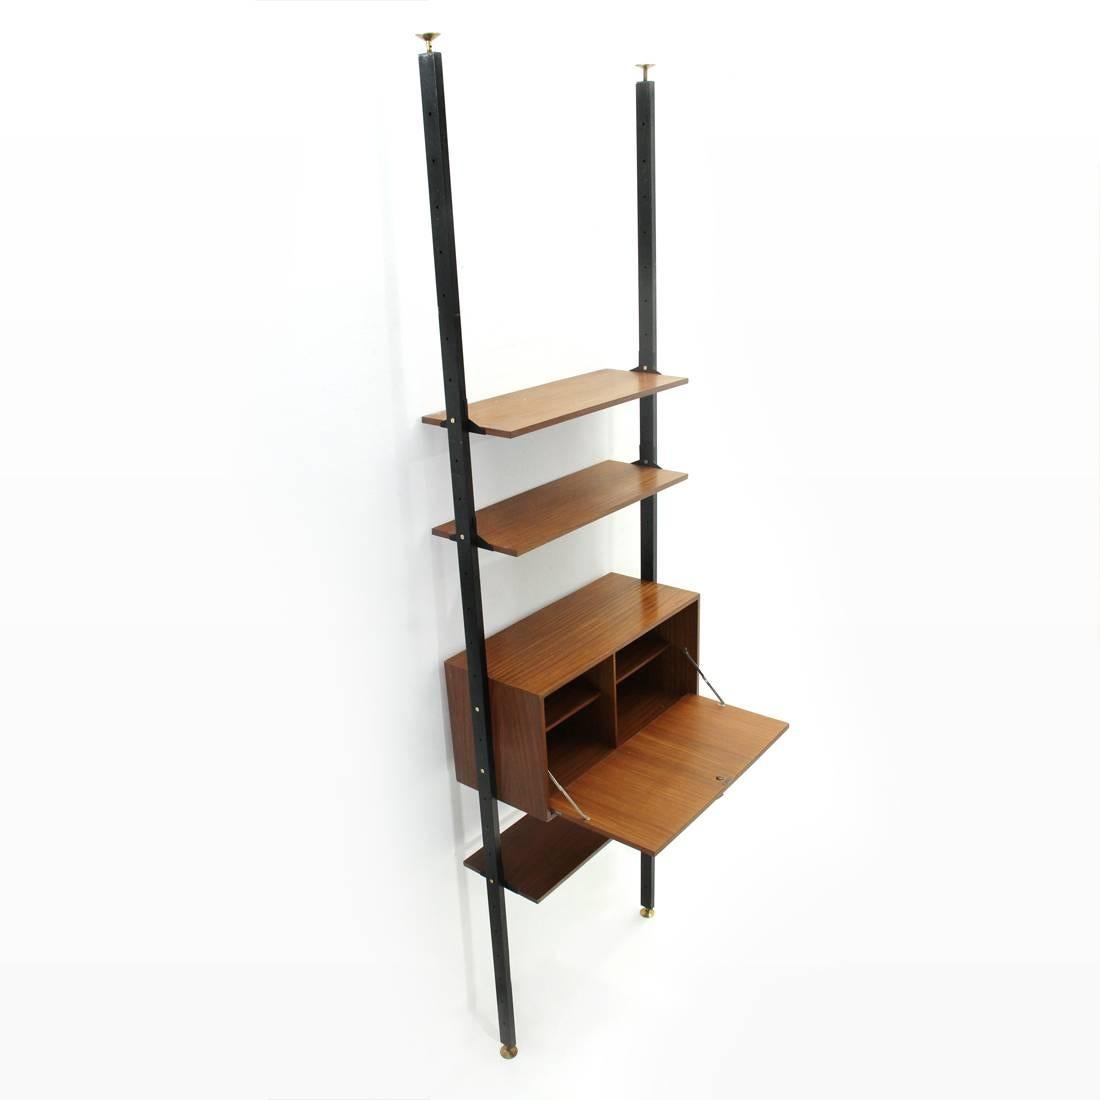 Italian manufacture wall unit from the 1950s.
Uprights in black painted metal with adjustable brass feet.
Shelves and containers, in teak veneered wood.
Container compartment with internal shelves and folding door.
Brass handle and